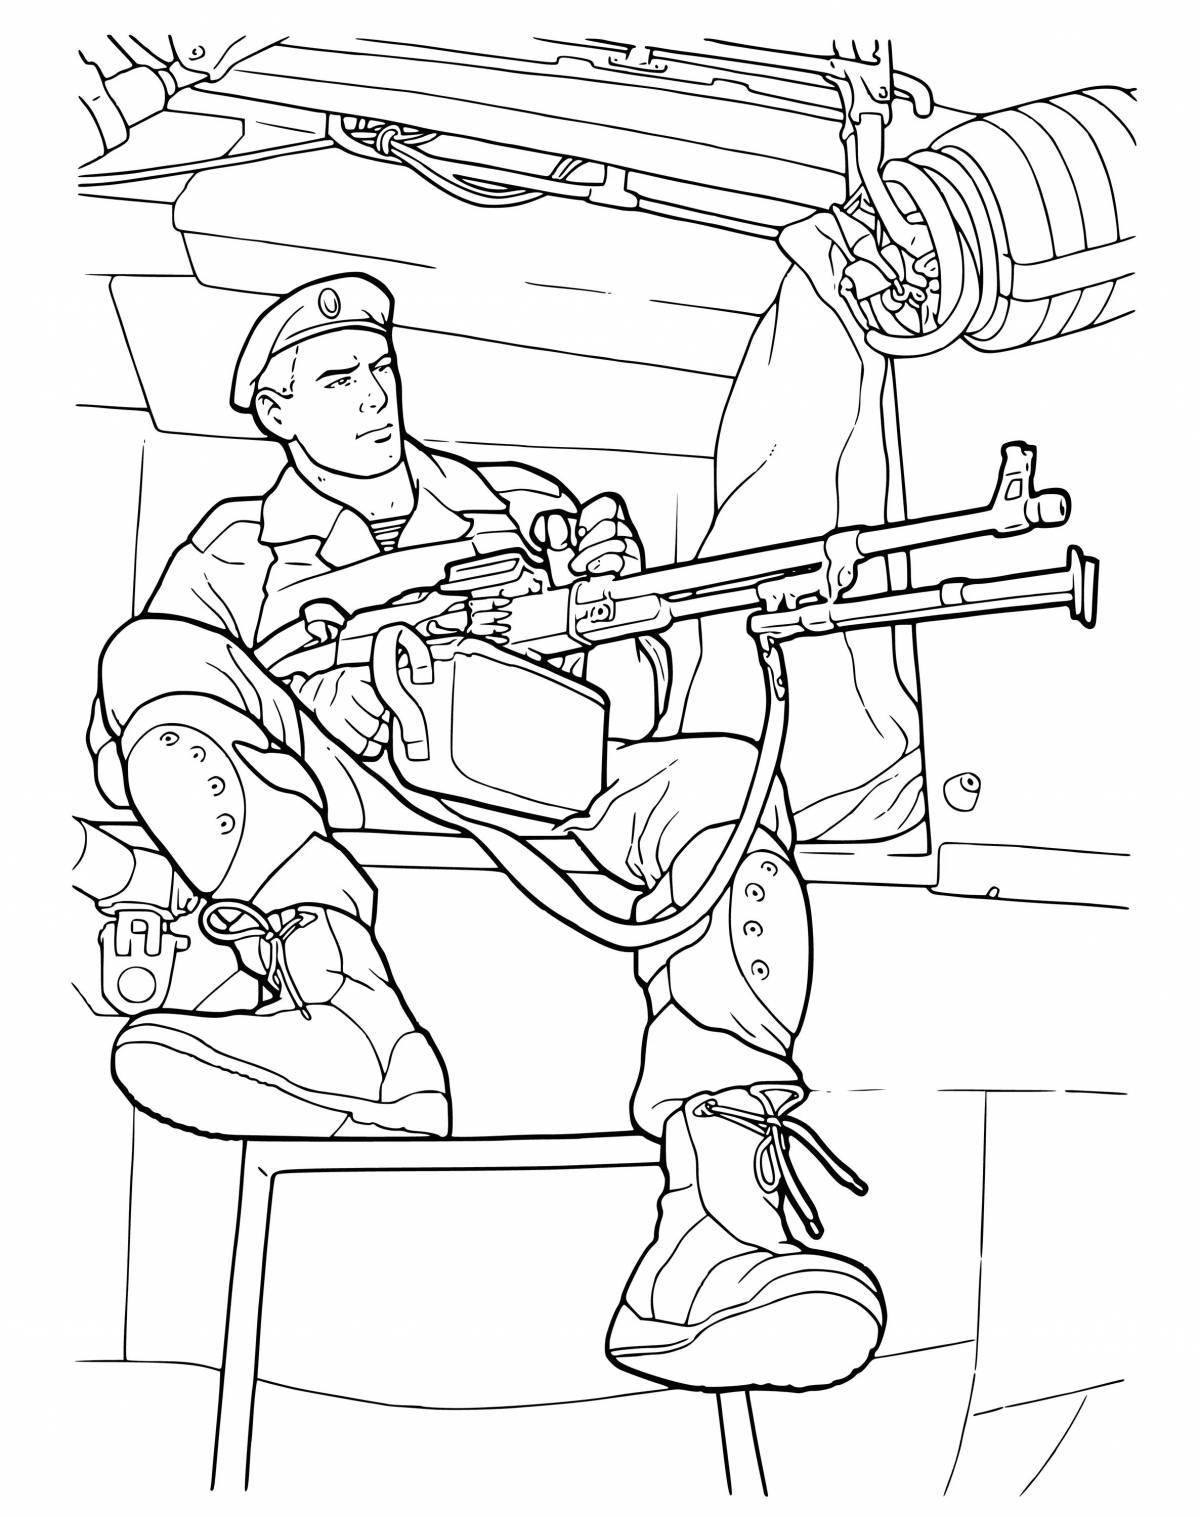 Dashing soldier coloring book for kids